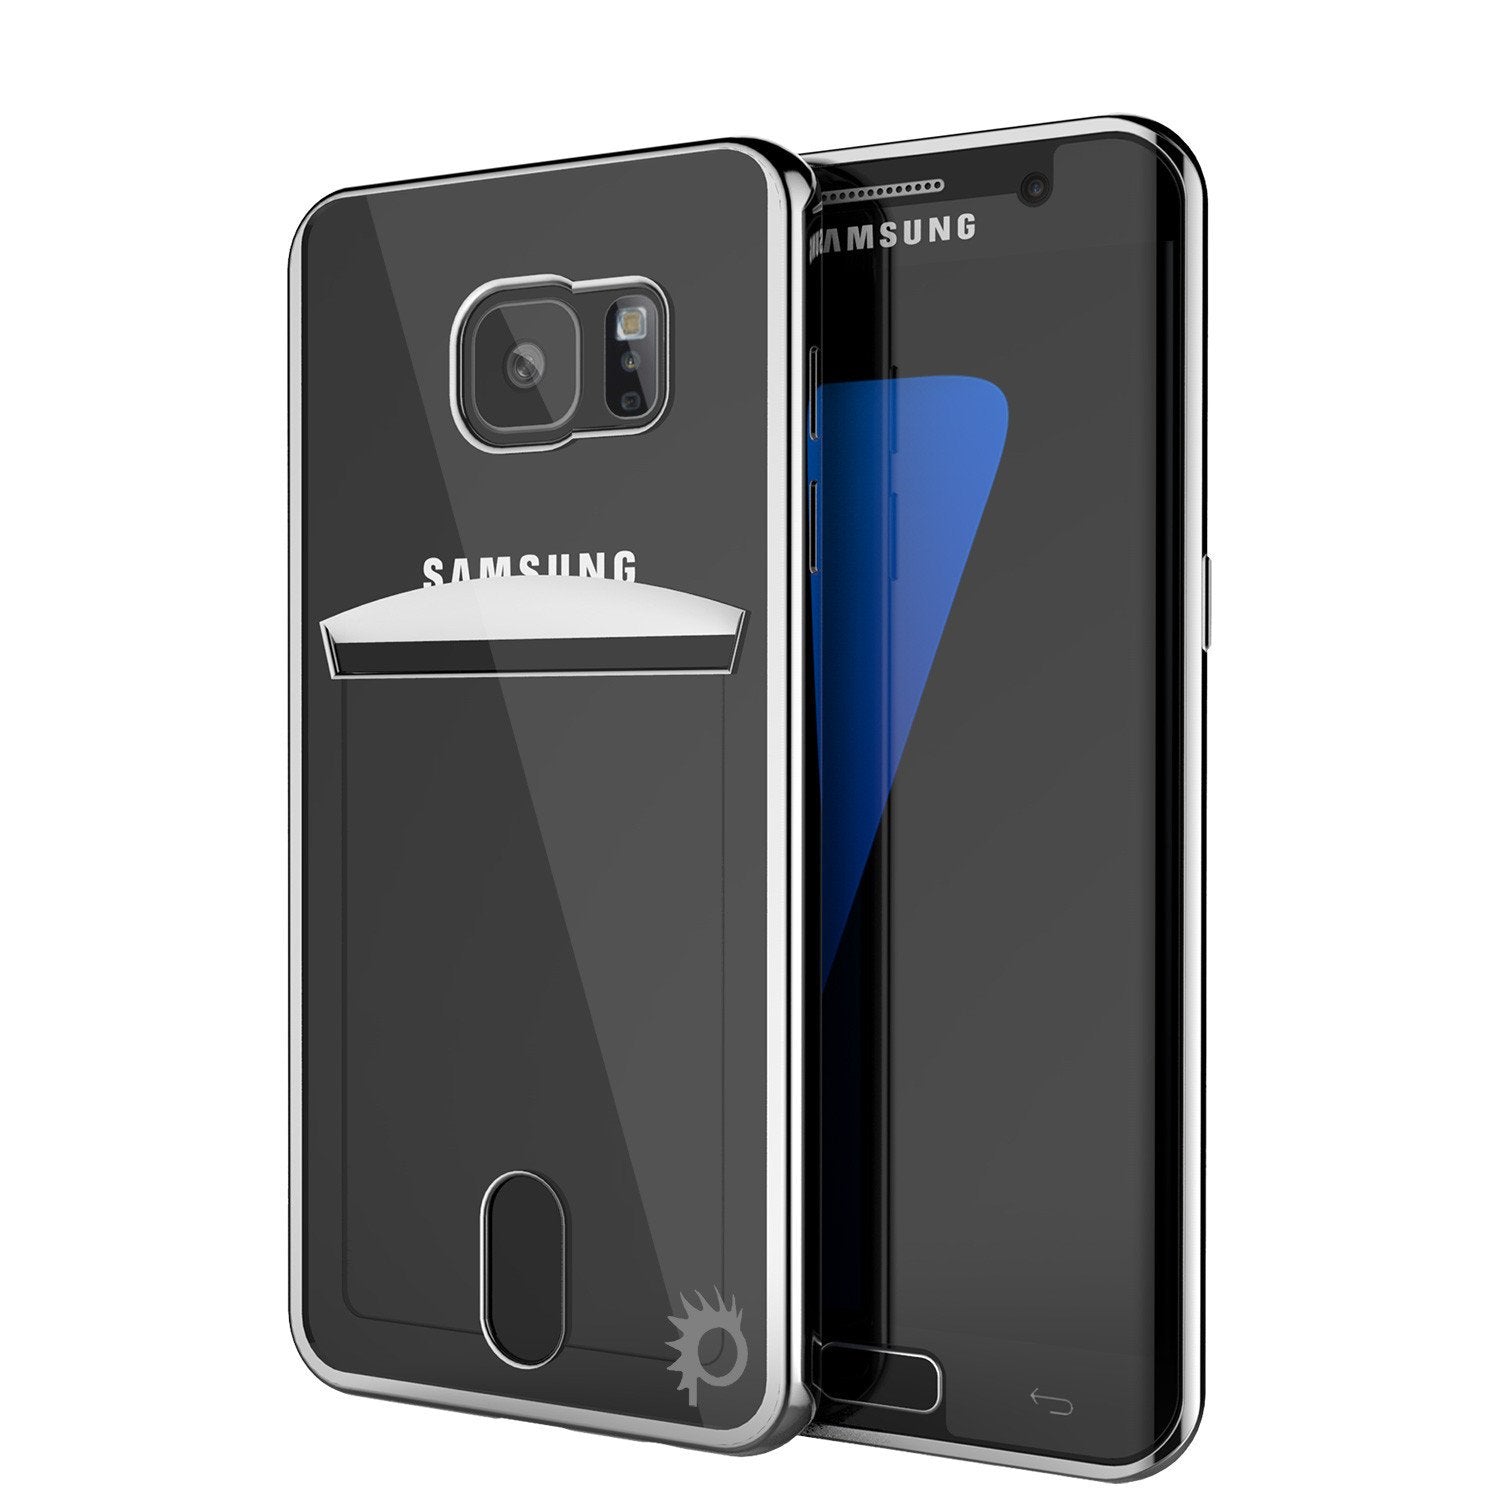 Galaxy S7 Case, PUNKCASE® LUCID Silver Series | Card Slot | SHIELD Screen Protector | Ultra fit